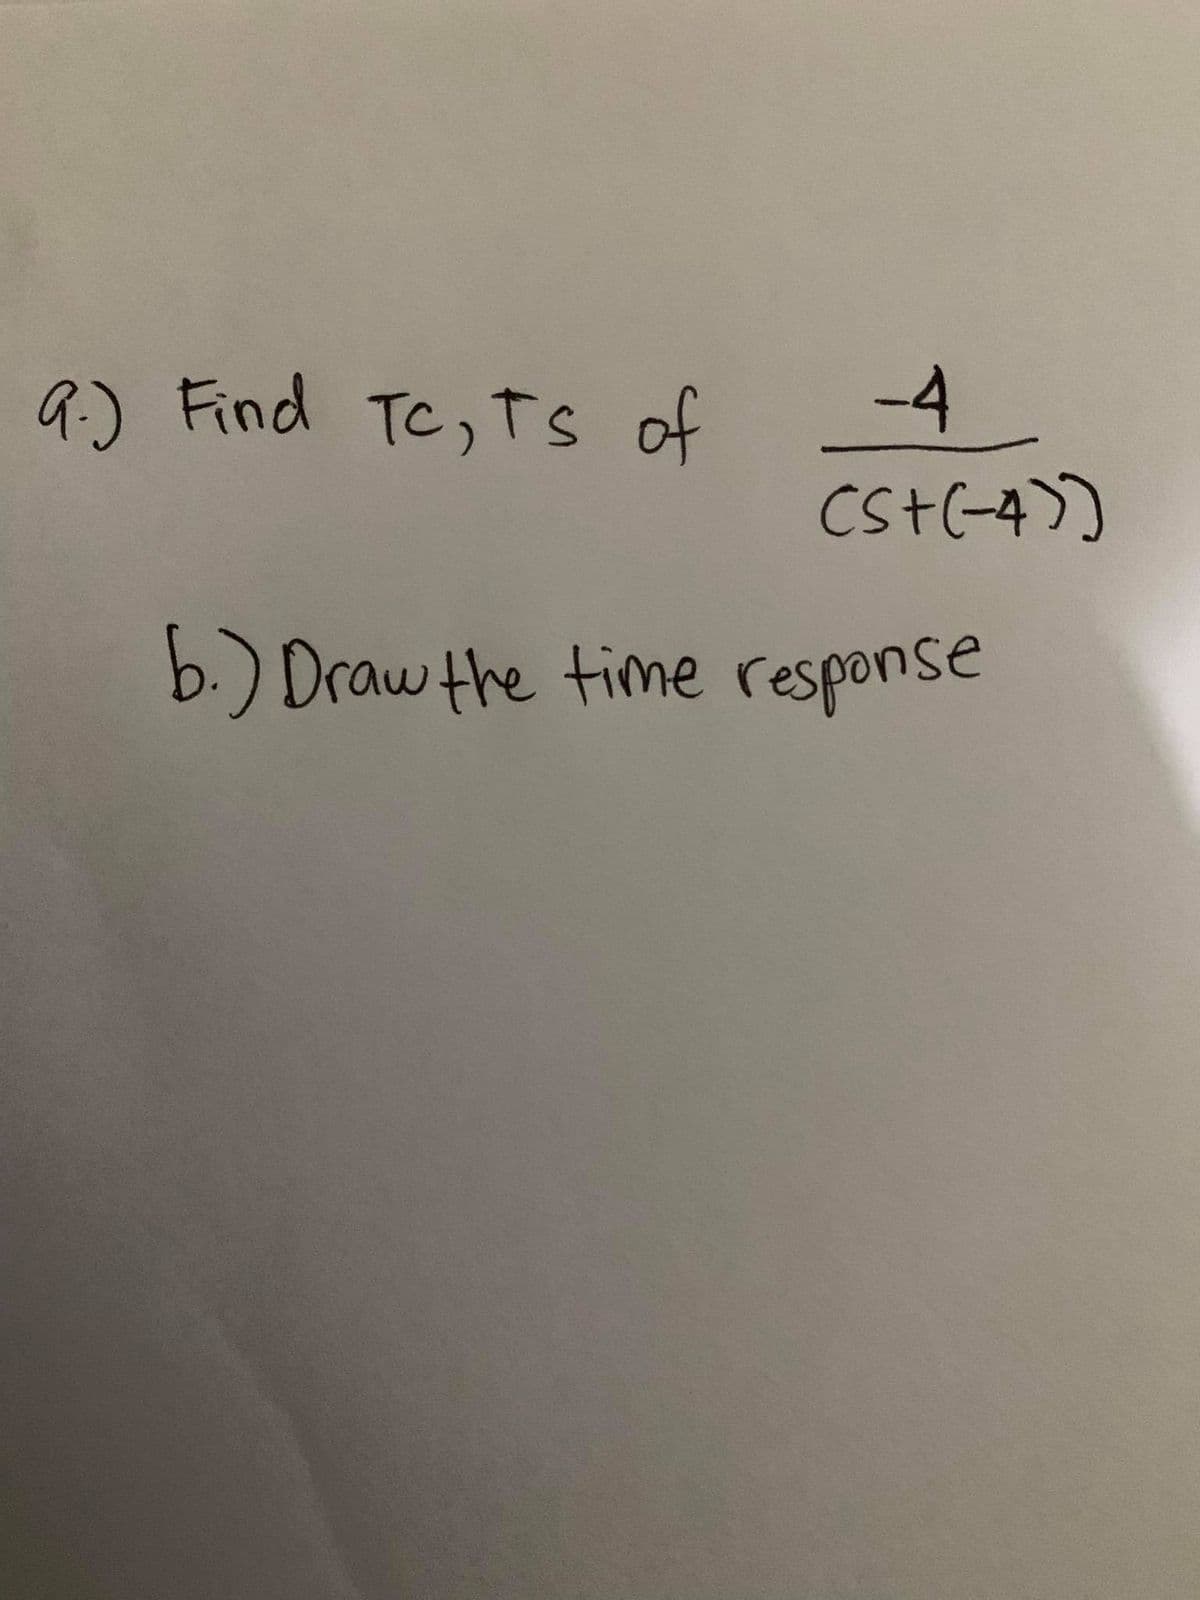 a) Find Tc,TS of
-4
CSt(-4>)
b.) Draw the time response
